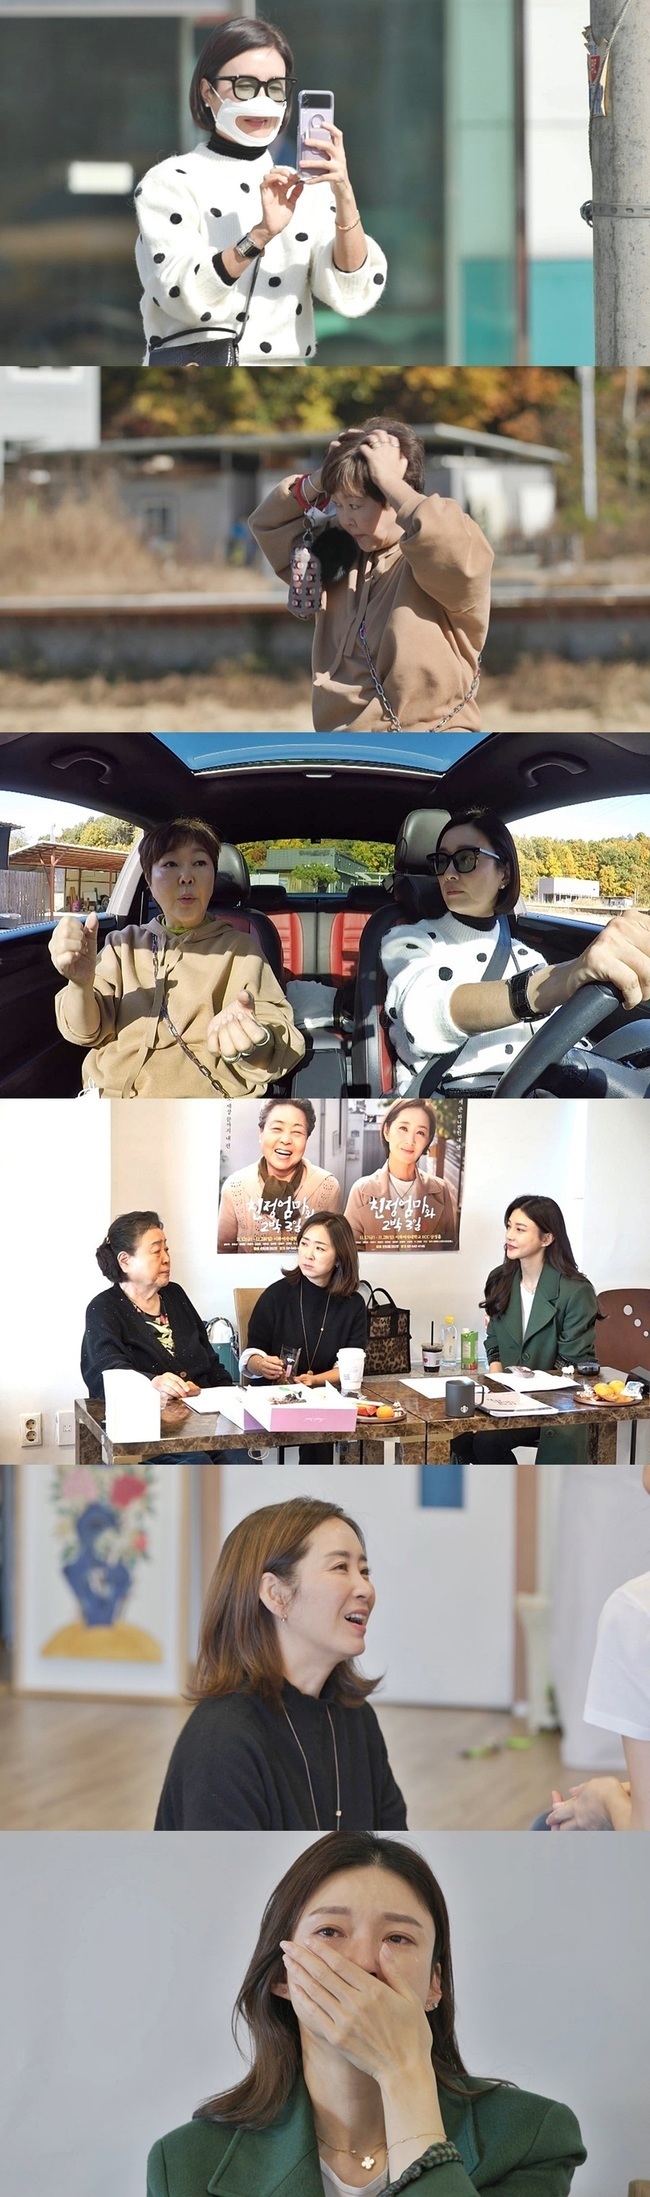 Cha Ye-ryun declares Play suspension in 60 years vs. Actor Kang Bu-Ja Force, saying I cant.On SBS One Mans War is Needed, which airs at 9 p.m. on December 9, a new Top Model will be held by the Seongsu-dong 4-member group (Oh Yeon-soo, Yun Yu-Seon, This is the law, Cha Ye-ryun).This is the law stimulates curiosity by showing the top model on the drivers license and preparing for the second act of life.In particular, Oh Yeon-soo is attracting attention by going to Avatar Parking for T-course training, which is a vulnerable section of This is the law ahead of the drivers license test.On behalf of This is the law, which has not yet obtained a license, Oh Yeon-soo will be intrigued by the steering wheel and following instructions.However, for a while, MC Shin Dong-yeop was worried that the couple are driving away, and soon Oh Yeon-soo also said, (Driving training is a division for couples. Even those who showed uncomfortable signs toward this is the law could not let go of tension.I wonder what happened between the two.This is the law, which was on the test in earnest, faced a crisis with a look of a struggle when facing the T course.This is the law, which has been disqualified for winning consecutive deductions due to signal violation and acceleration in the previous mock test, focuses attention on whether it can pass the test with the practice effect with Oh Yeon-soo.In addition, Cha Ye-ryun, who attended the play 2 nights and 3 days script reading scene with the invitation of Yun Yu-Seon, greeted the presidential ship Kang Bu-Ja and made his first Top Model in the play in front of Kang Bu-Ja with a 60-year acting career.Cha Ye-ryun, who was concentrating on acting while reciting the script, made mistakes such as forgetting the ambassador or not catching the emotion properly because of nervousness.When Kang Bu-Ja, who watched this, said, If you want to play (play), do it straight, Cha Ye-ryun said, I can not play that game. It is said that Cha Ye-ryuns first Play Top Model can be completed safely.